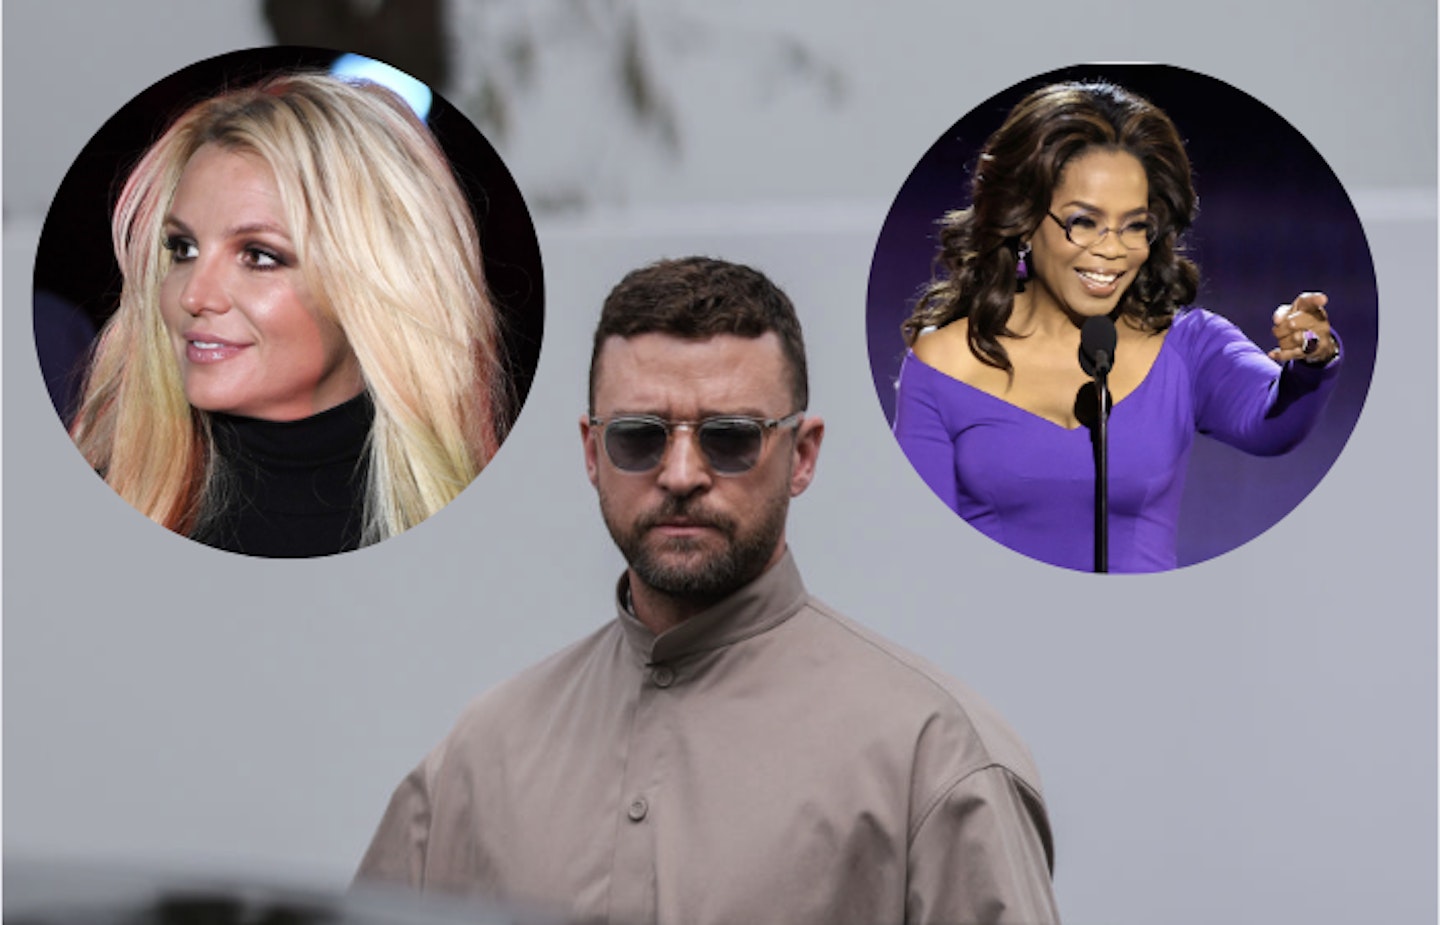 Justin Timberlake is set to do a tell-all with Oprah about Britney Spears